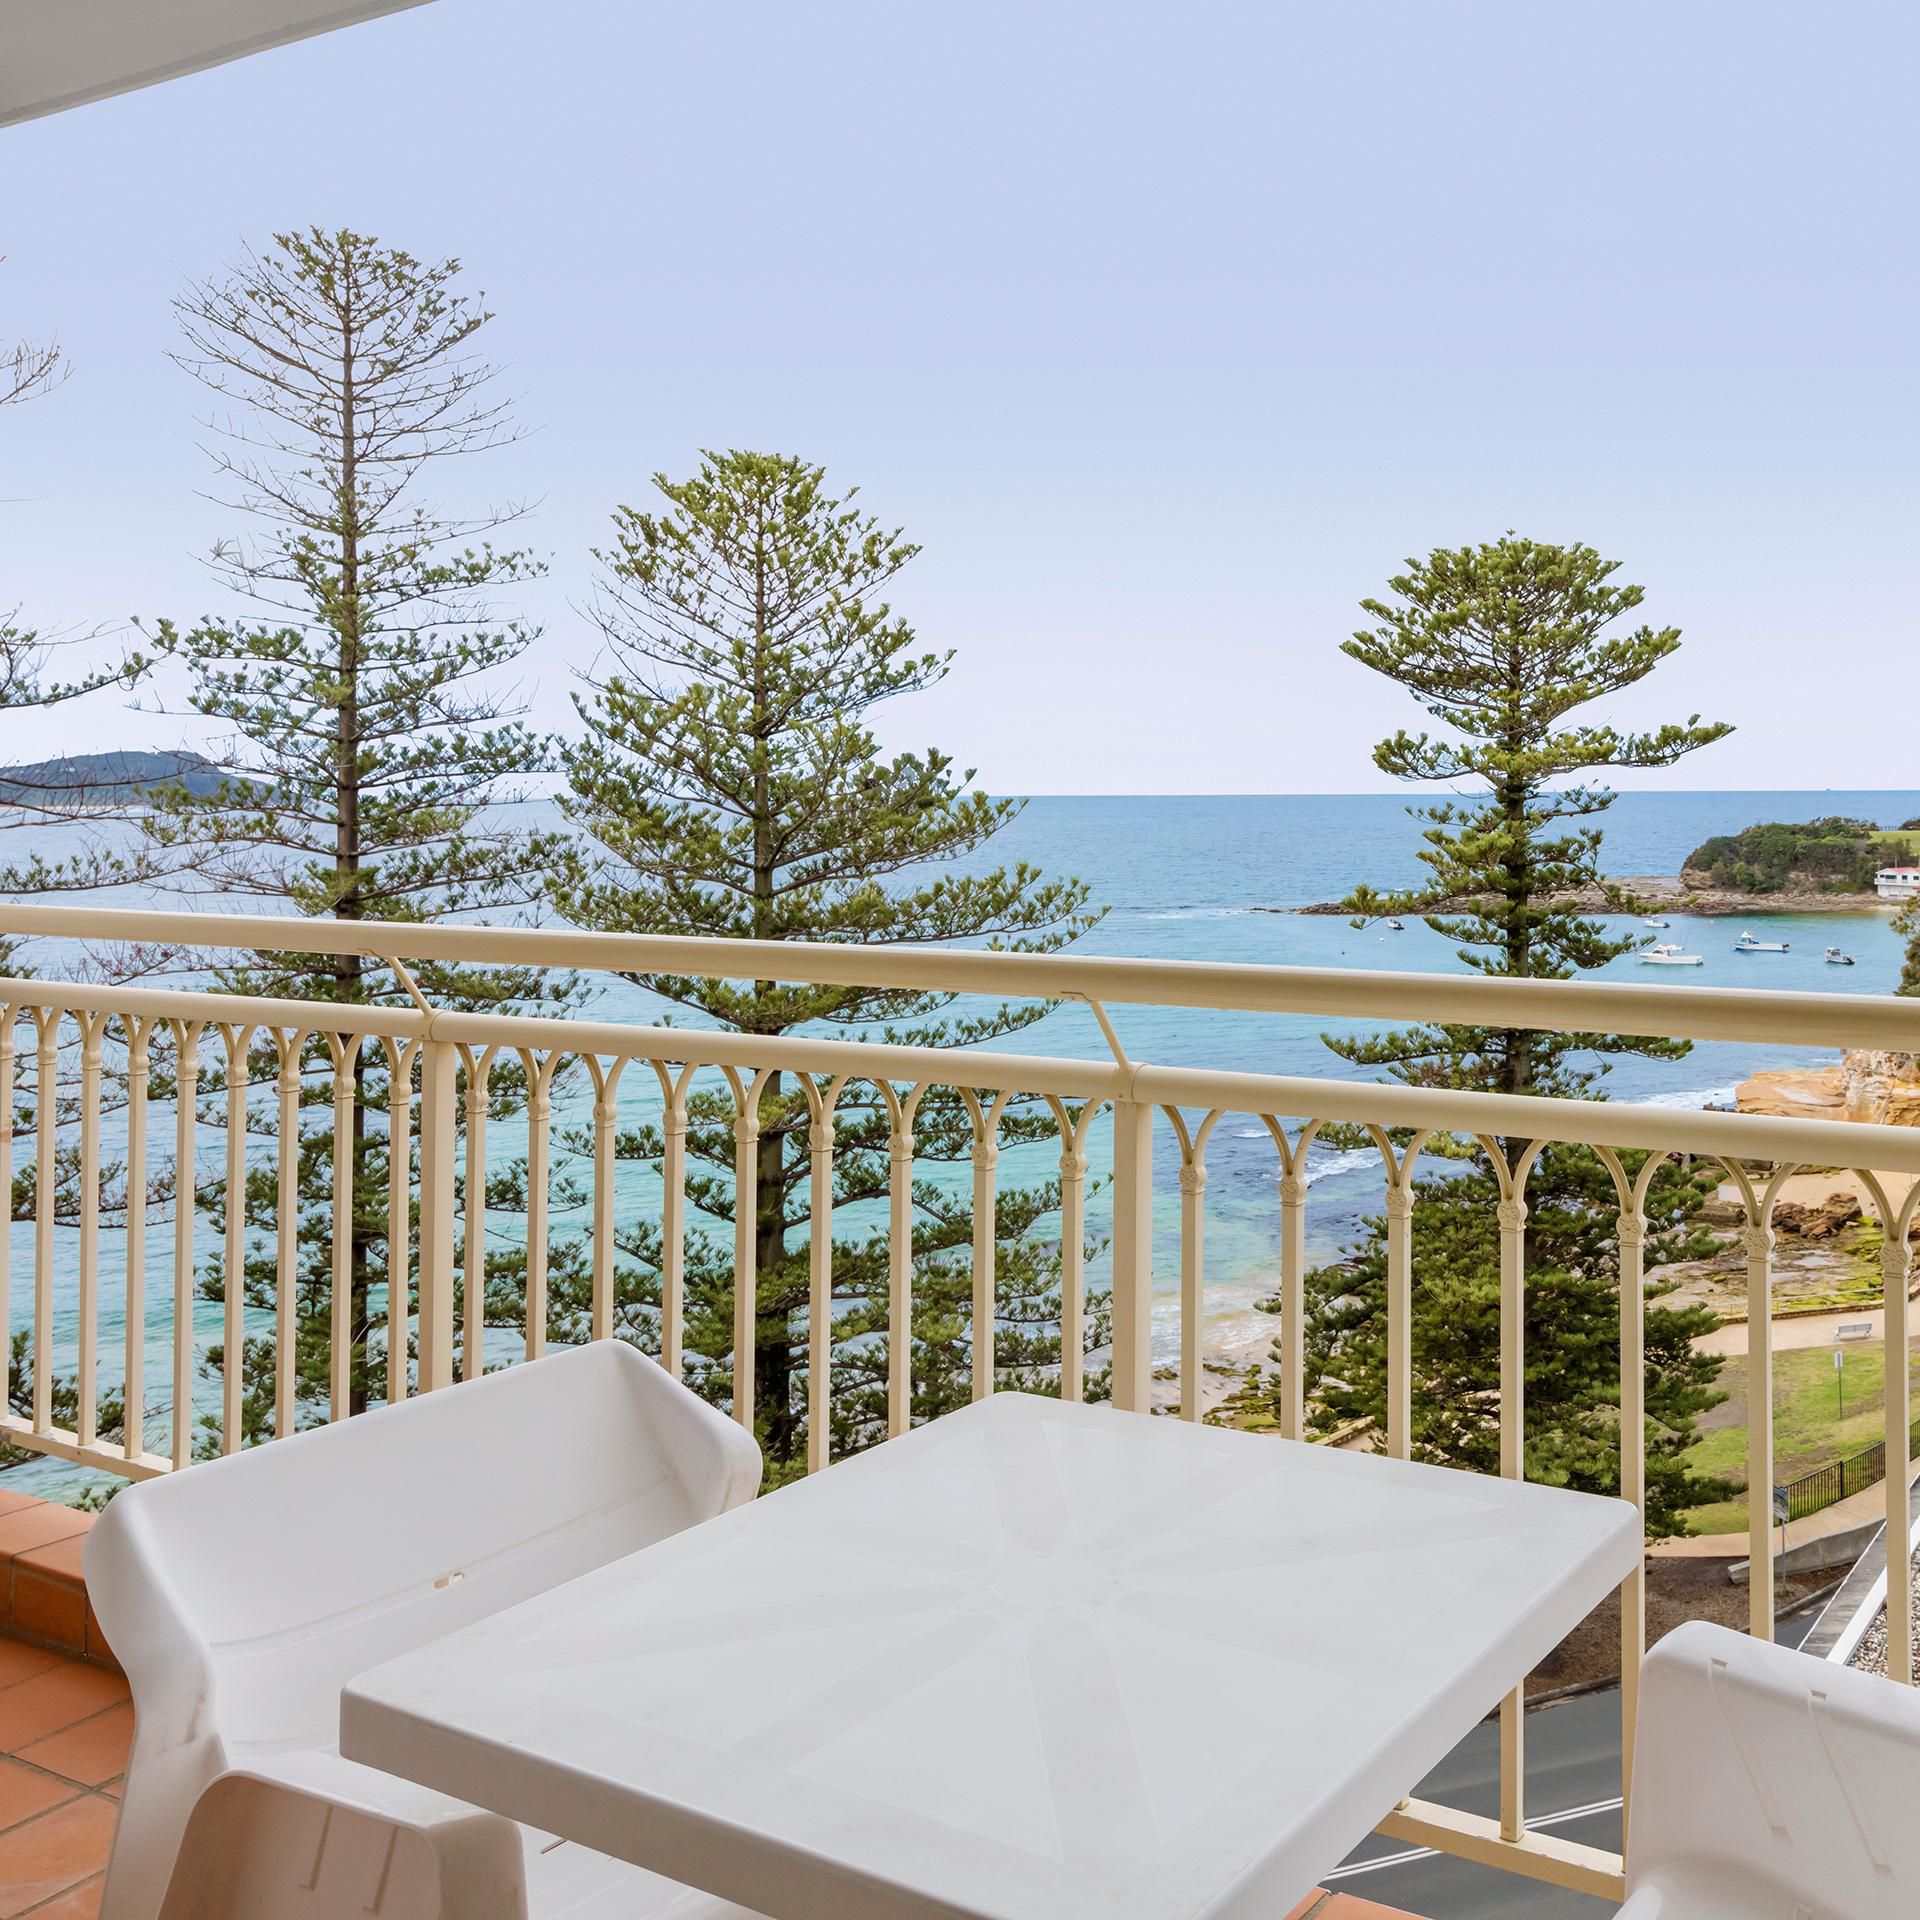 Pine Suite delivers picture-perfect scenery from your own balcony